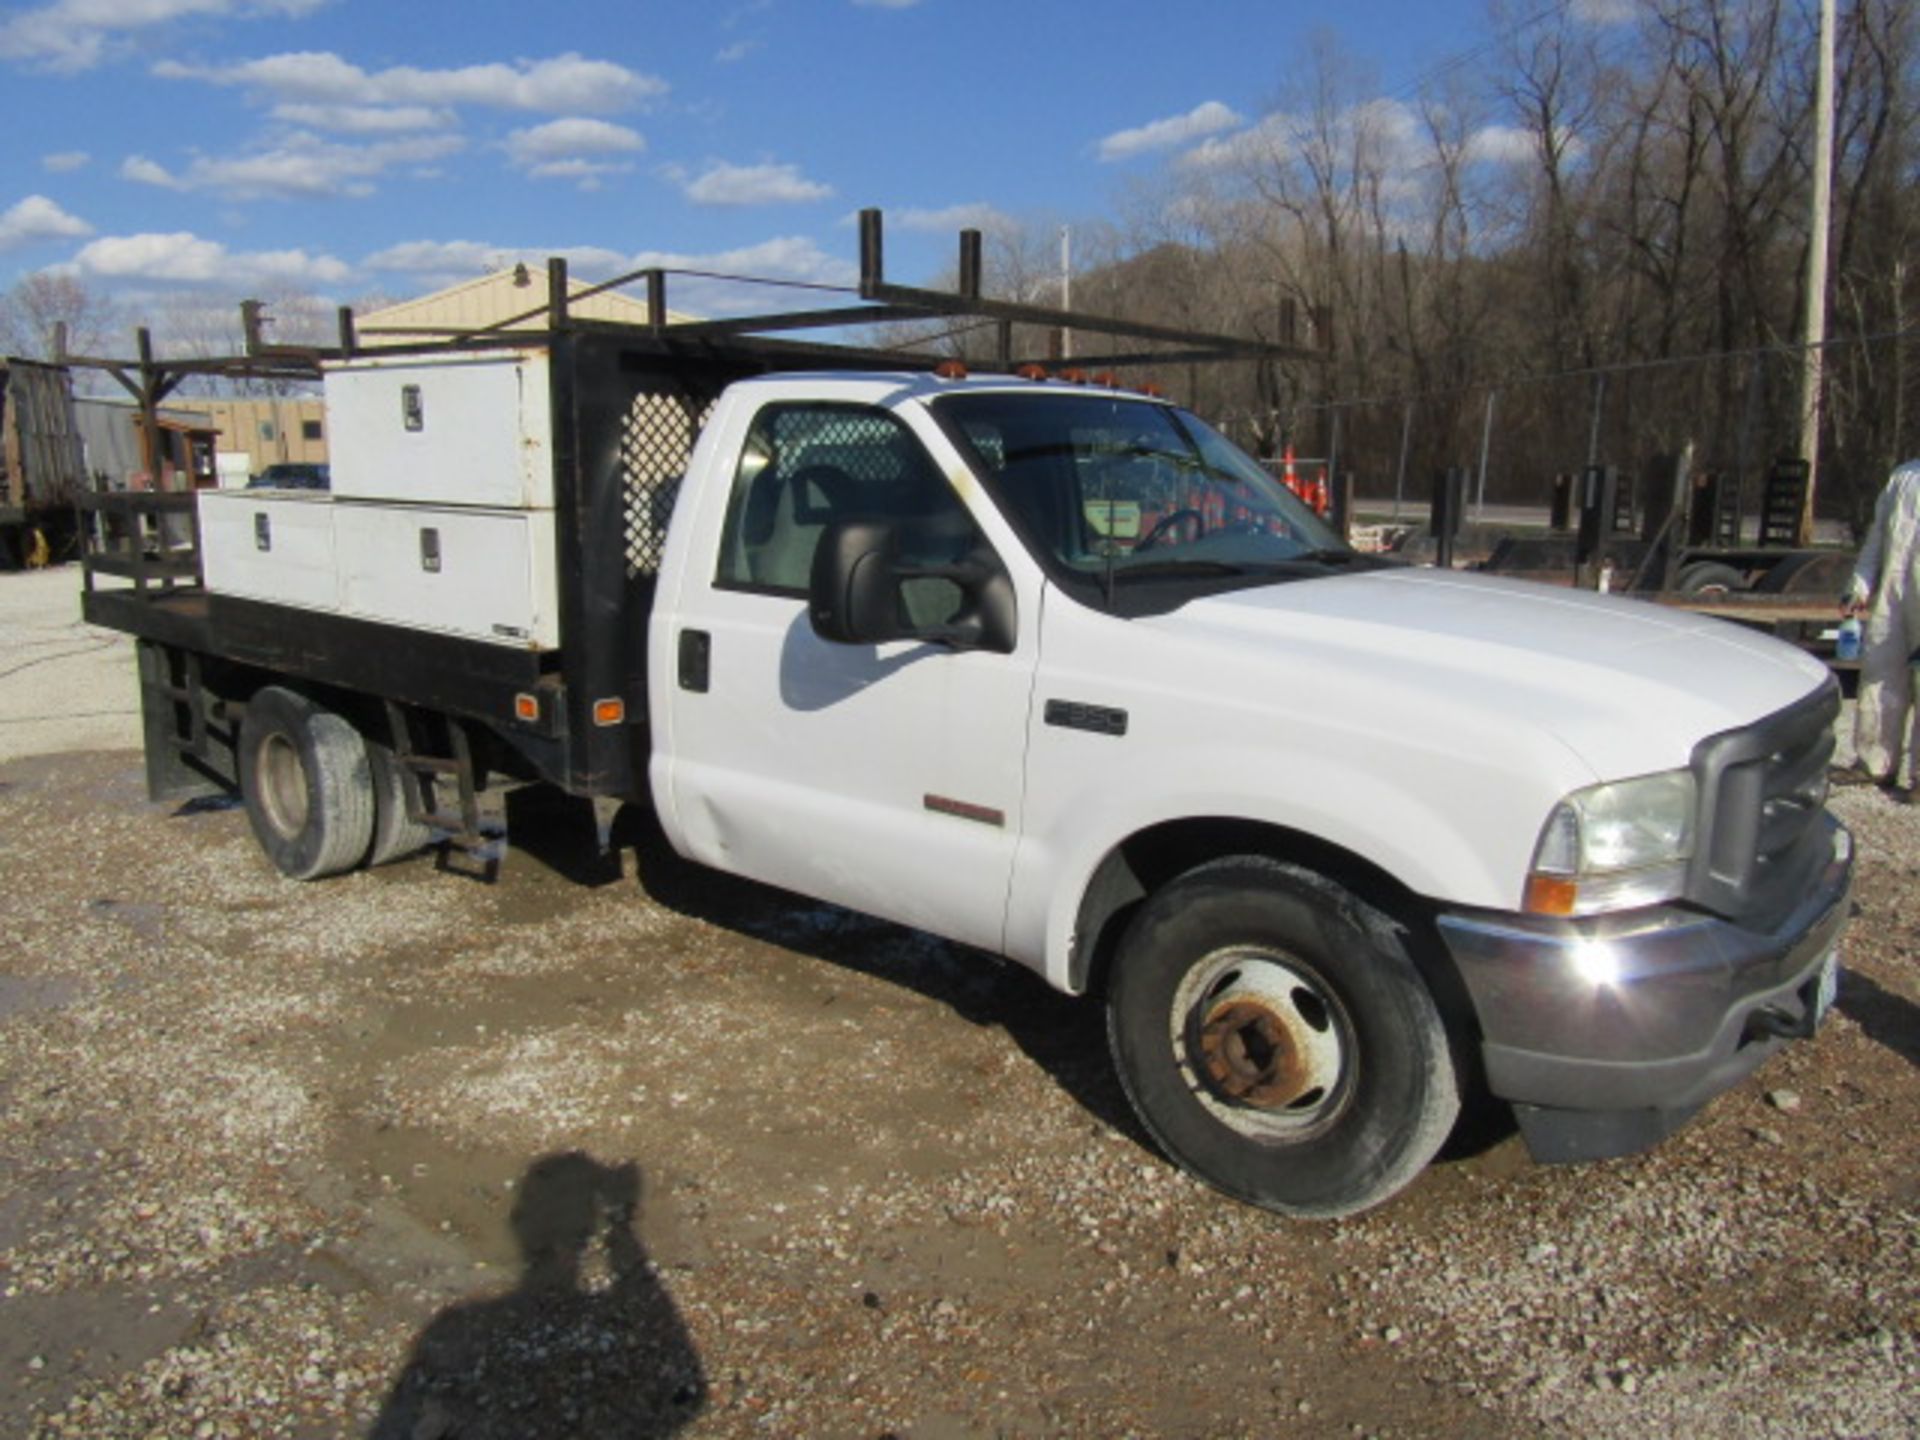 2004 Ford F350 Super Duty Utility Truck, Vin# 1FDWF36P34EA10279, 228,108 miles, Automatic, Power - Image 2 of 23